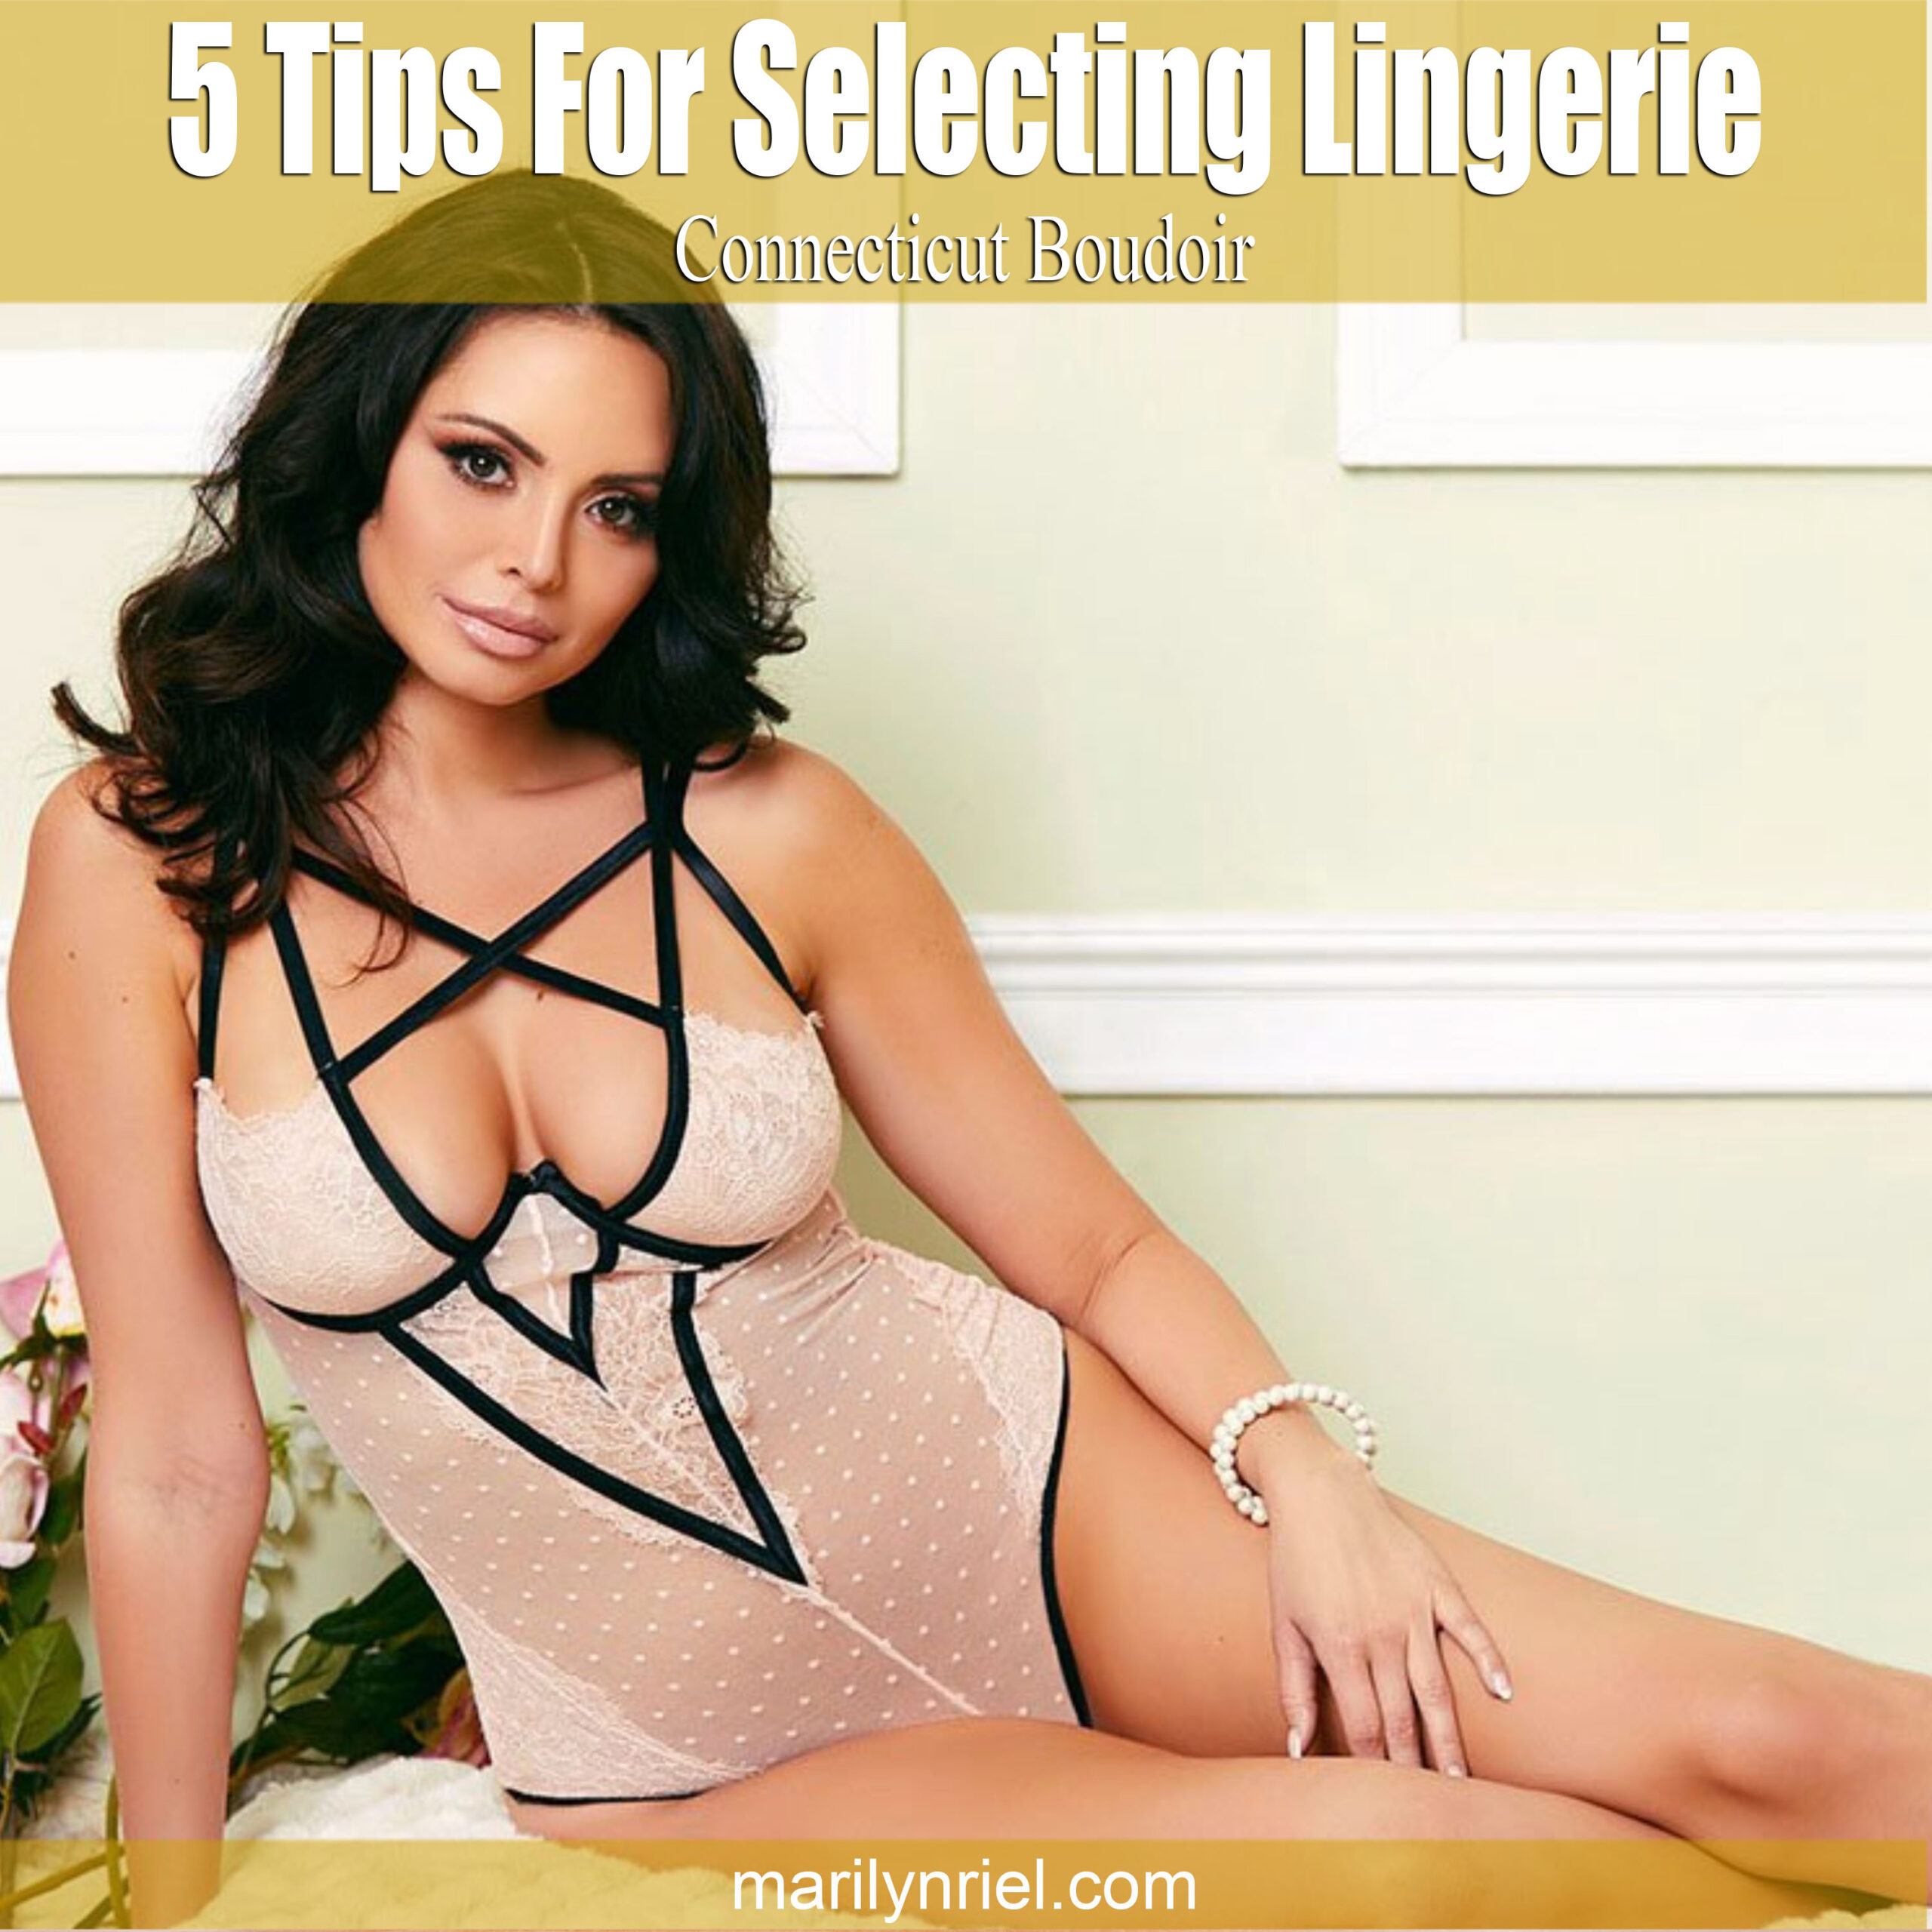 5 Tips for Selecting Lingerie - Marilyn & Menagerie Title